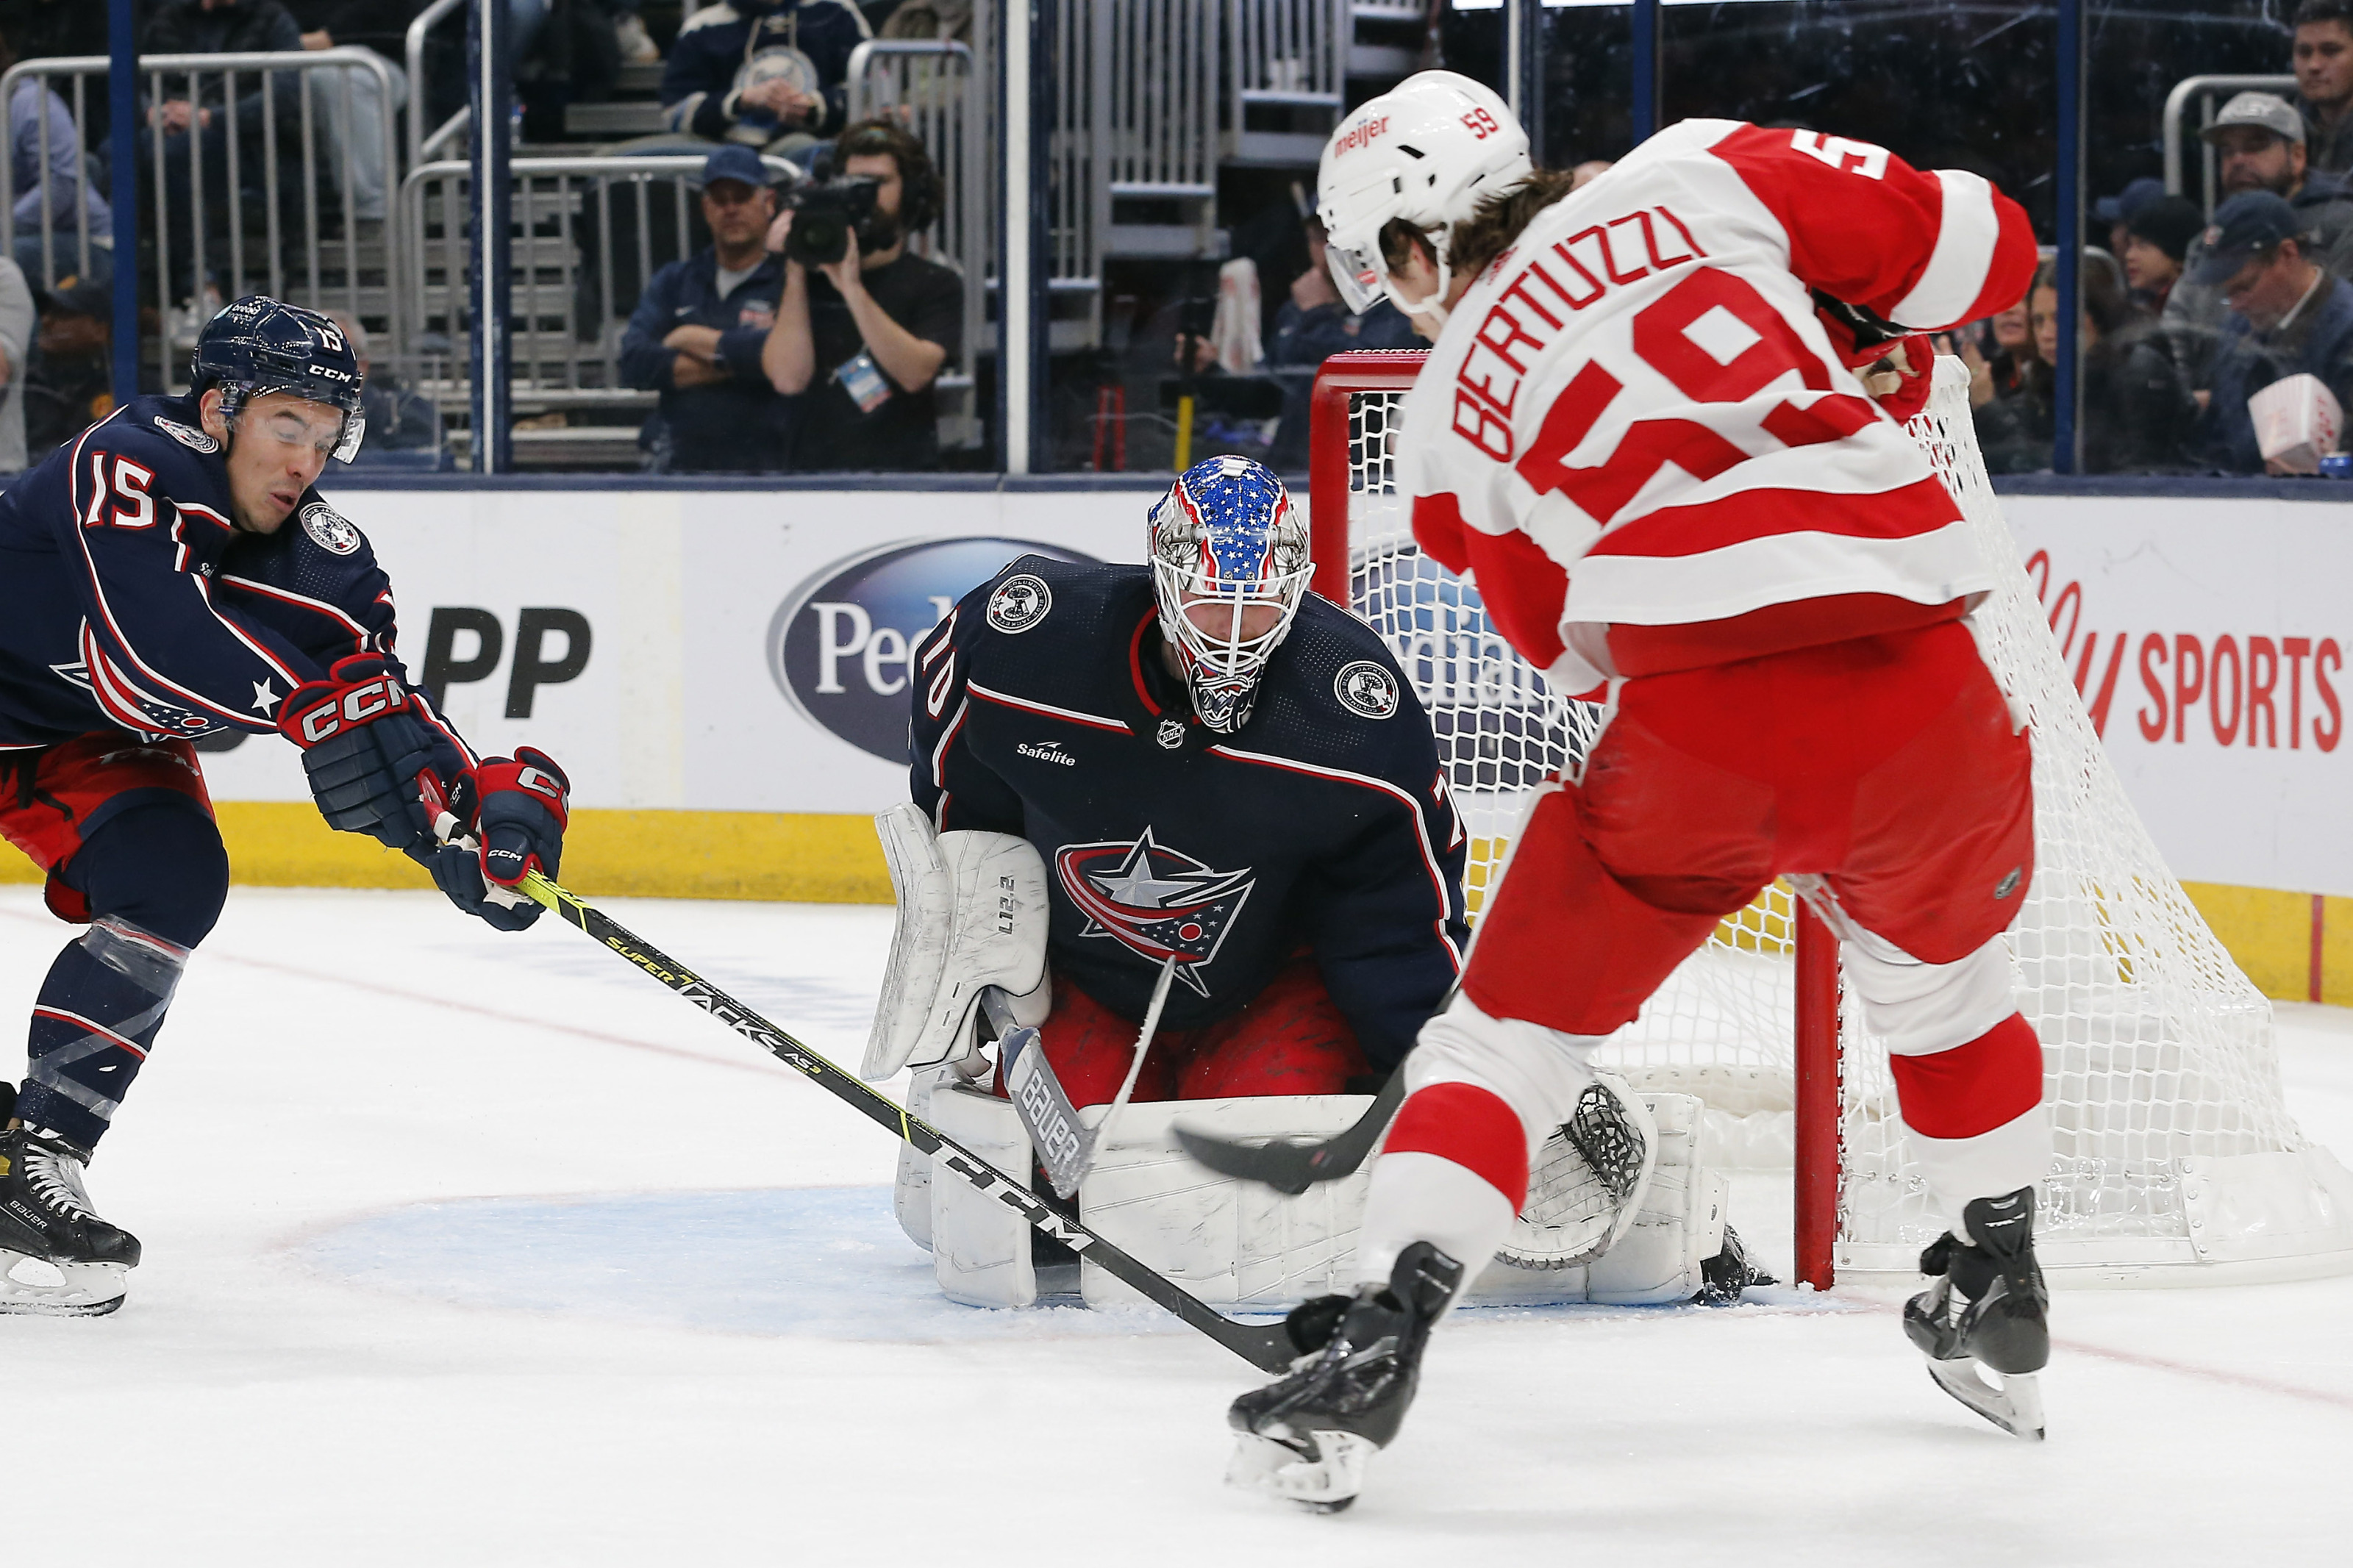 Blue Jackets vs Red Wings Prediction, Odds and Picks, Jan. 14